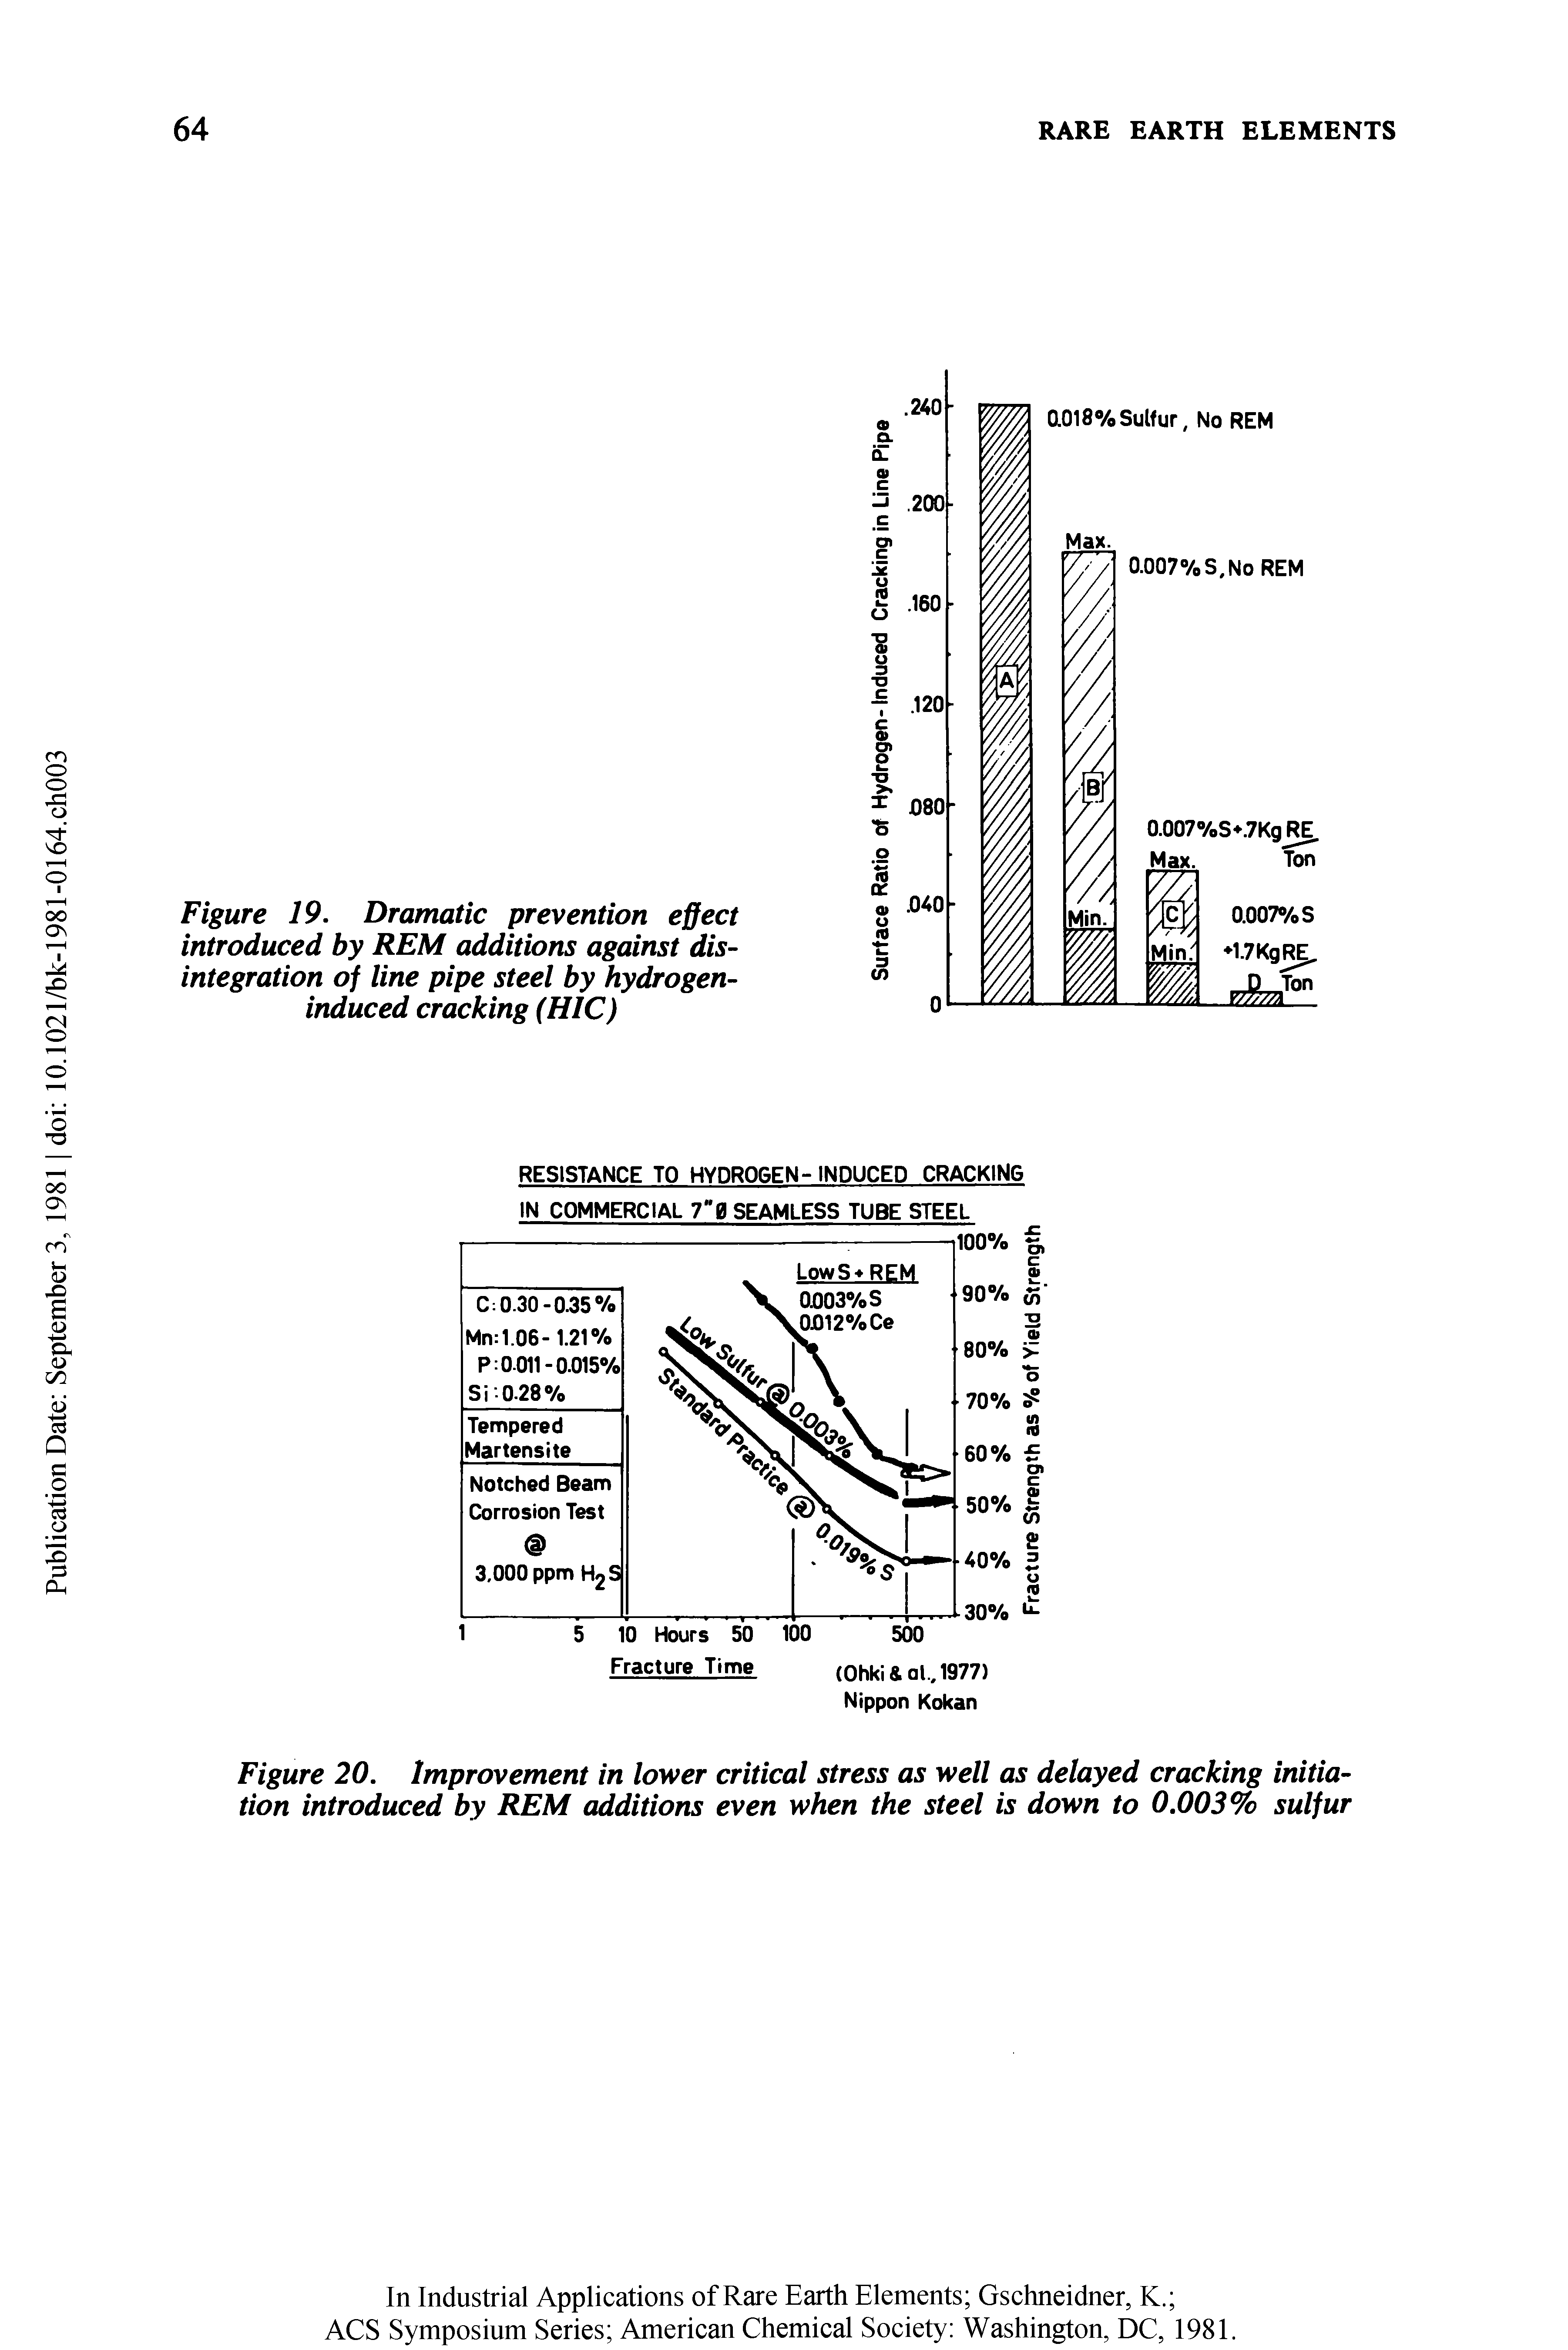 Figure 20. Improvement in lower critical stress as well as delayed cracking initiation introduced by REM additions even when the steel is down to 0.003% sulfur...